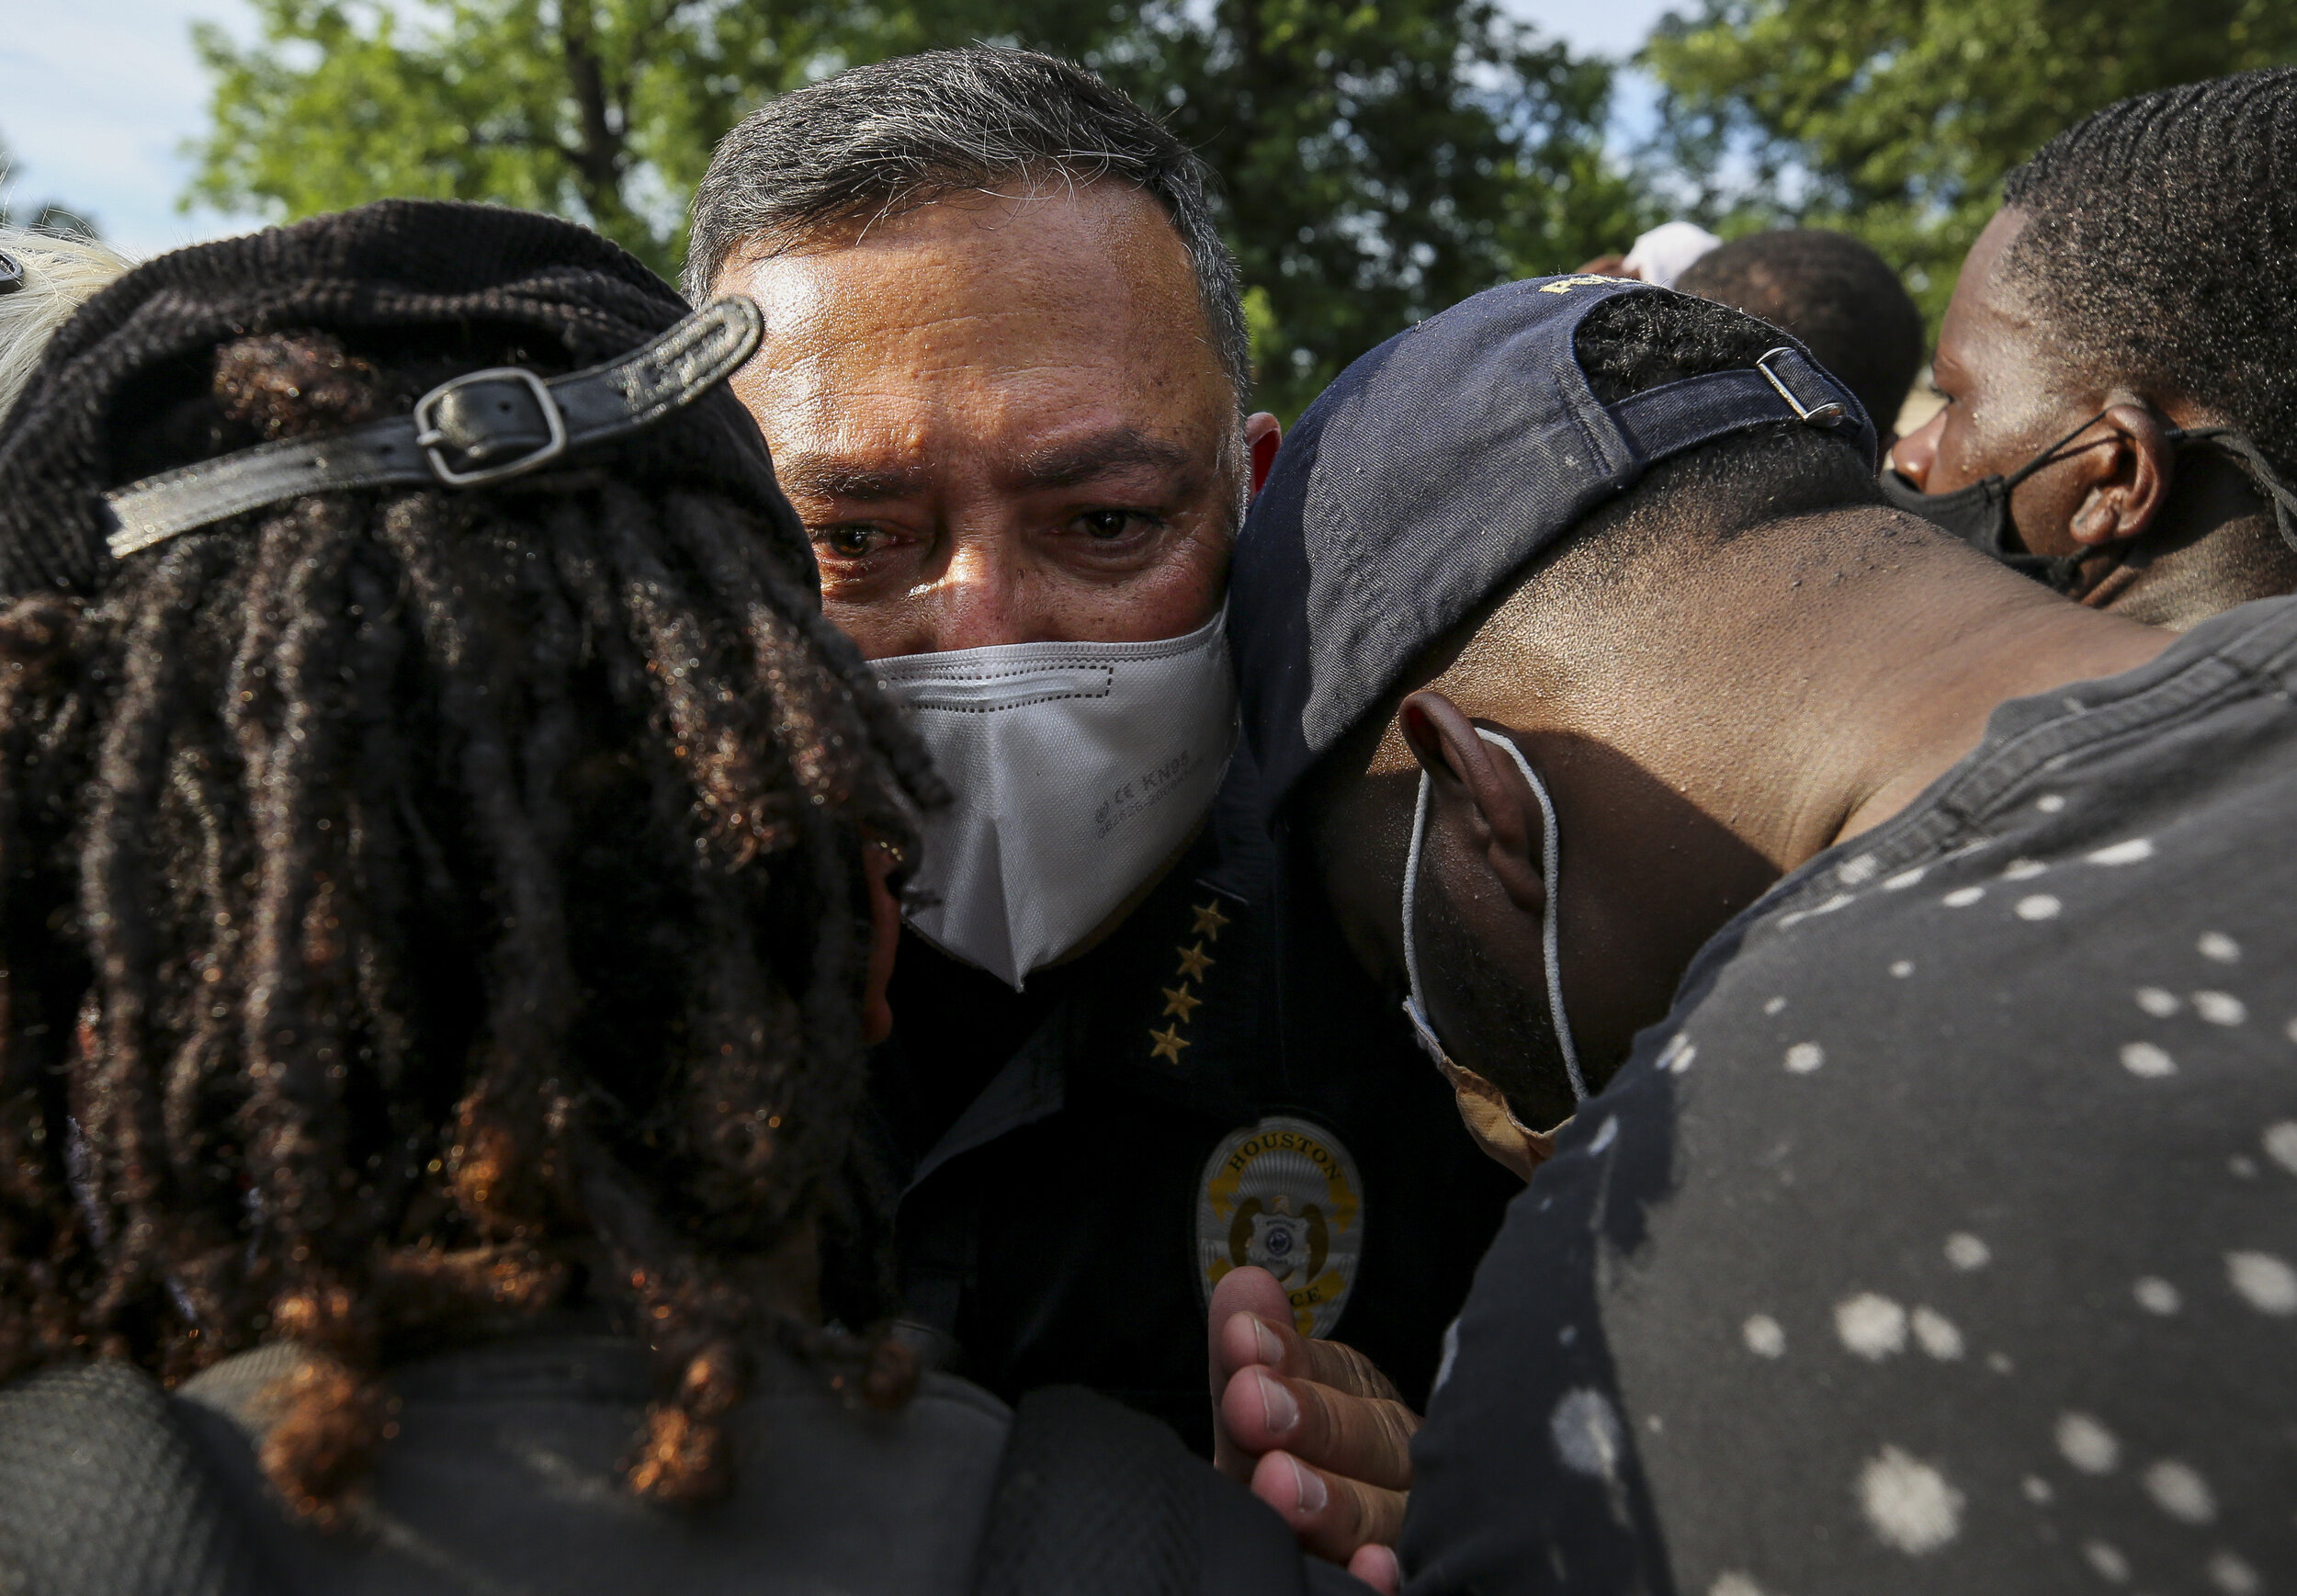  Houston Police chief Art Acevedo talks to demonstrators, explaining he needed more time to get his officers in place to block access to the freeway as tensions grew with people wanting to continue marching west on Elgin Street, on Saturday, May 30, 